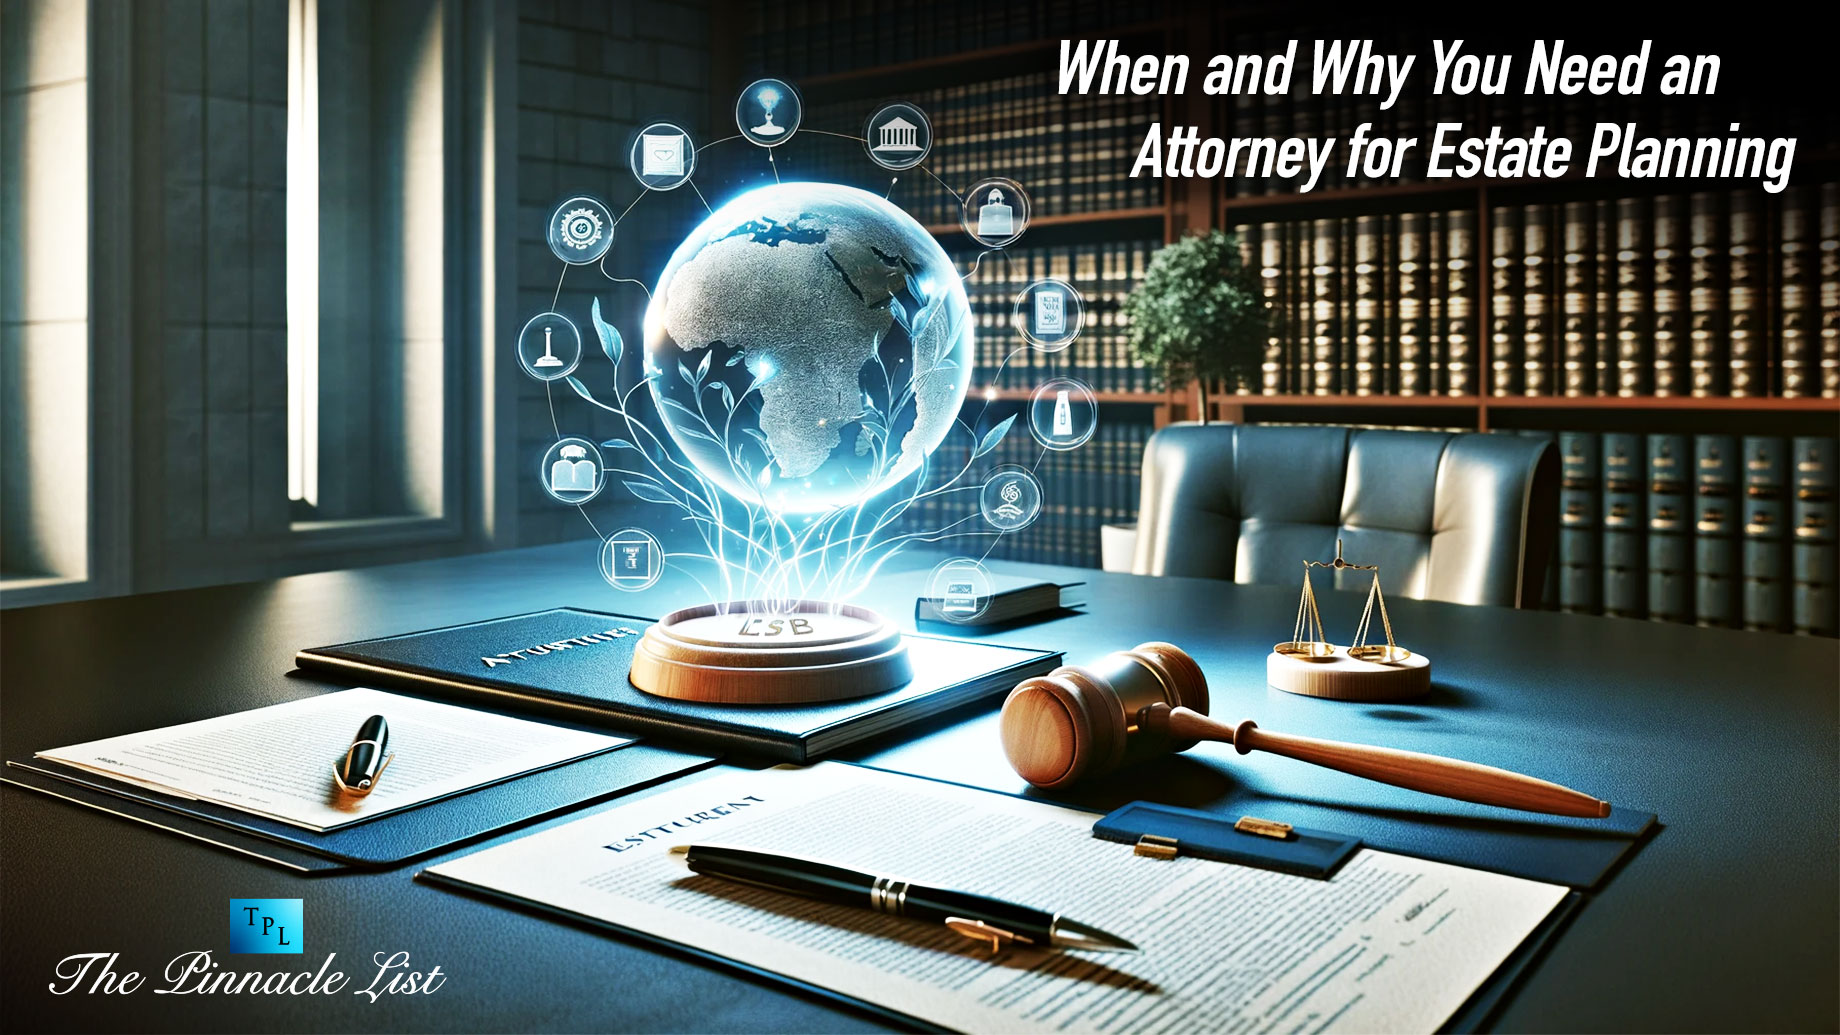 When and Why You Need an Attorney for Estate Planning